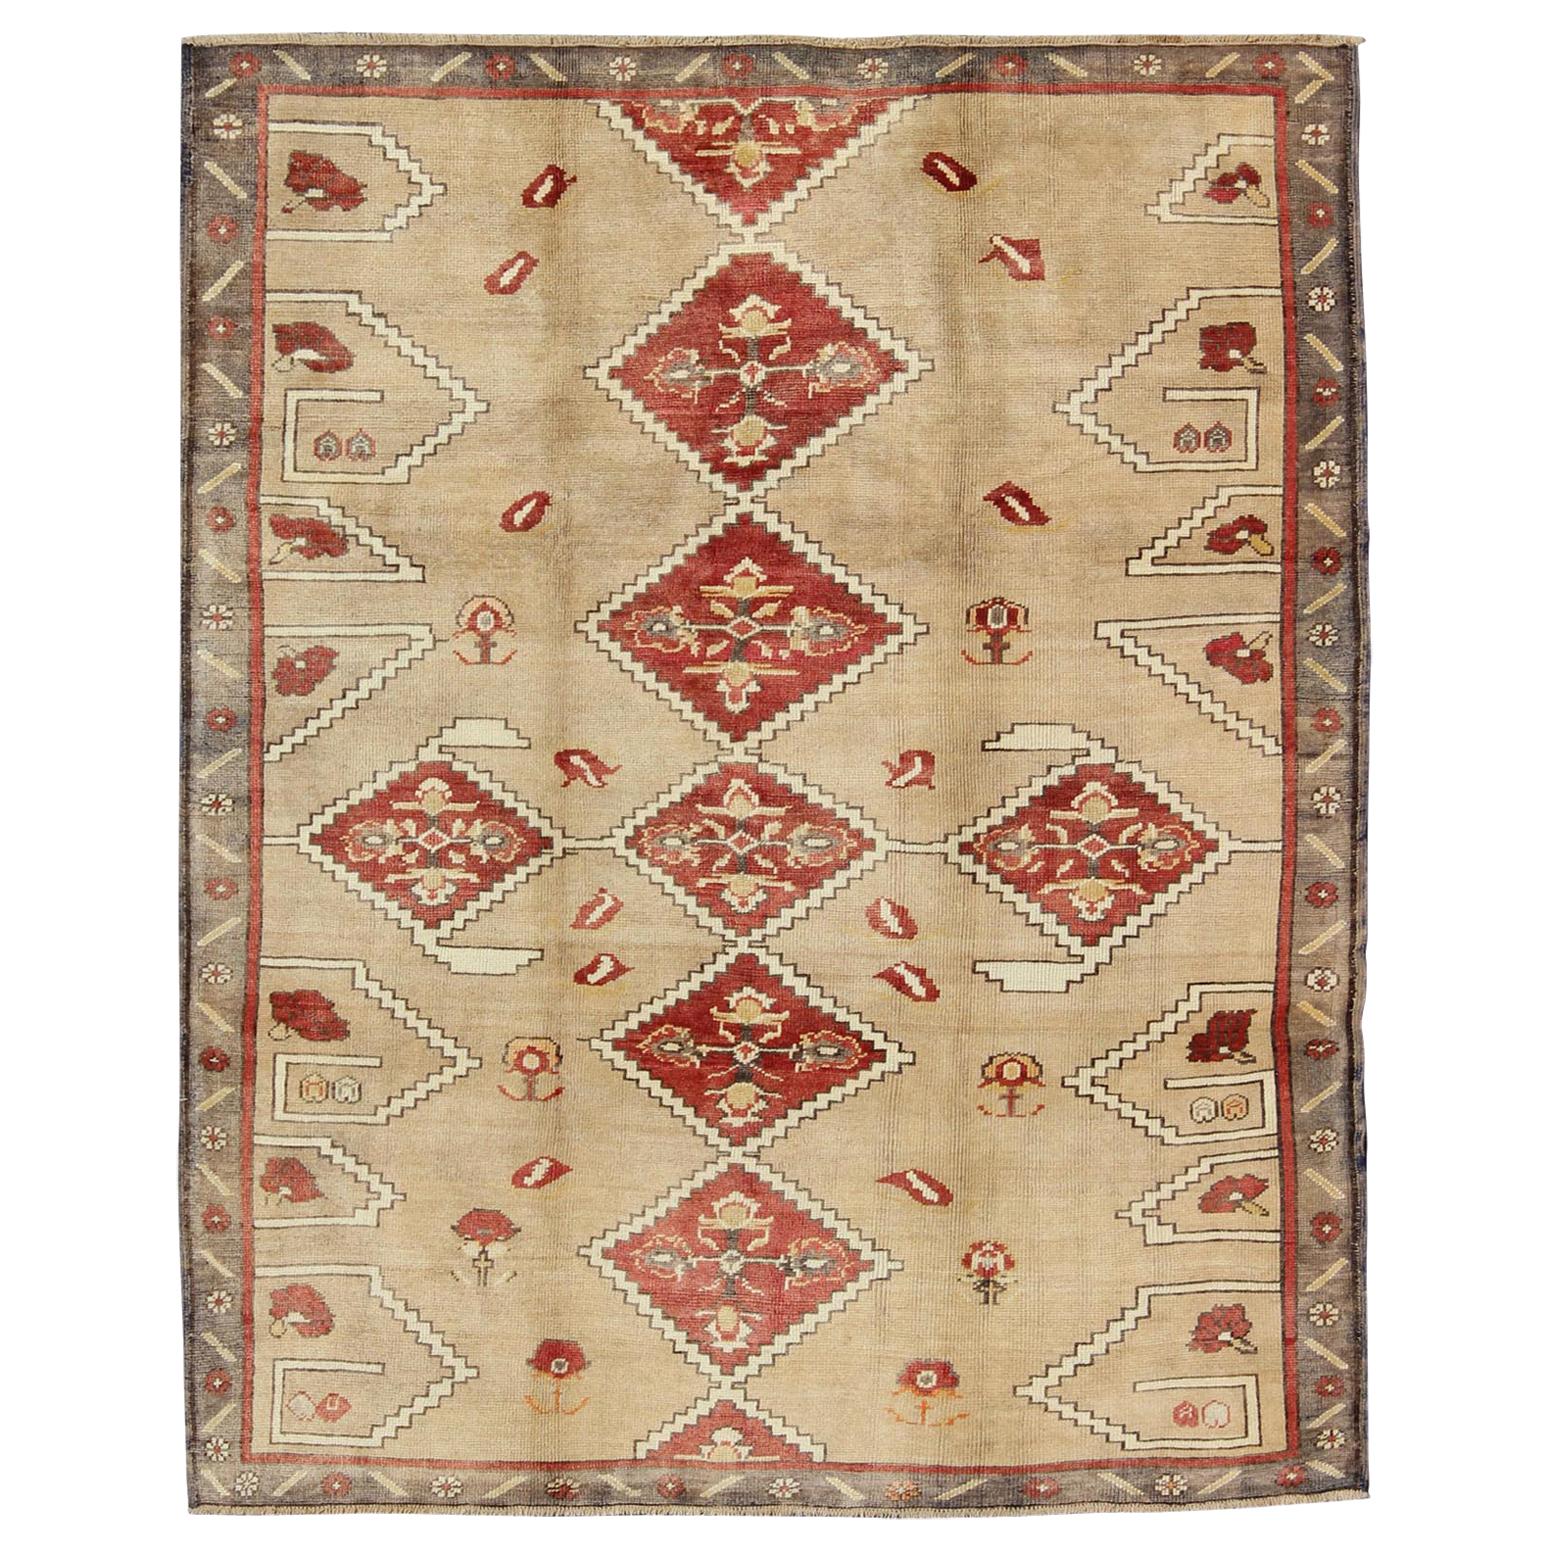 Diamond Medallion Vintage Turkish Oushak Rug in Red, Brown and Cream